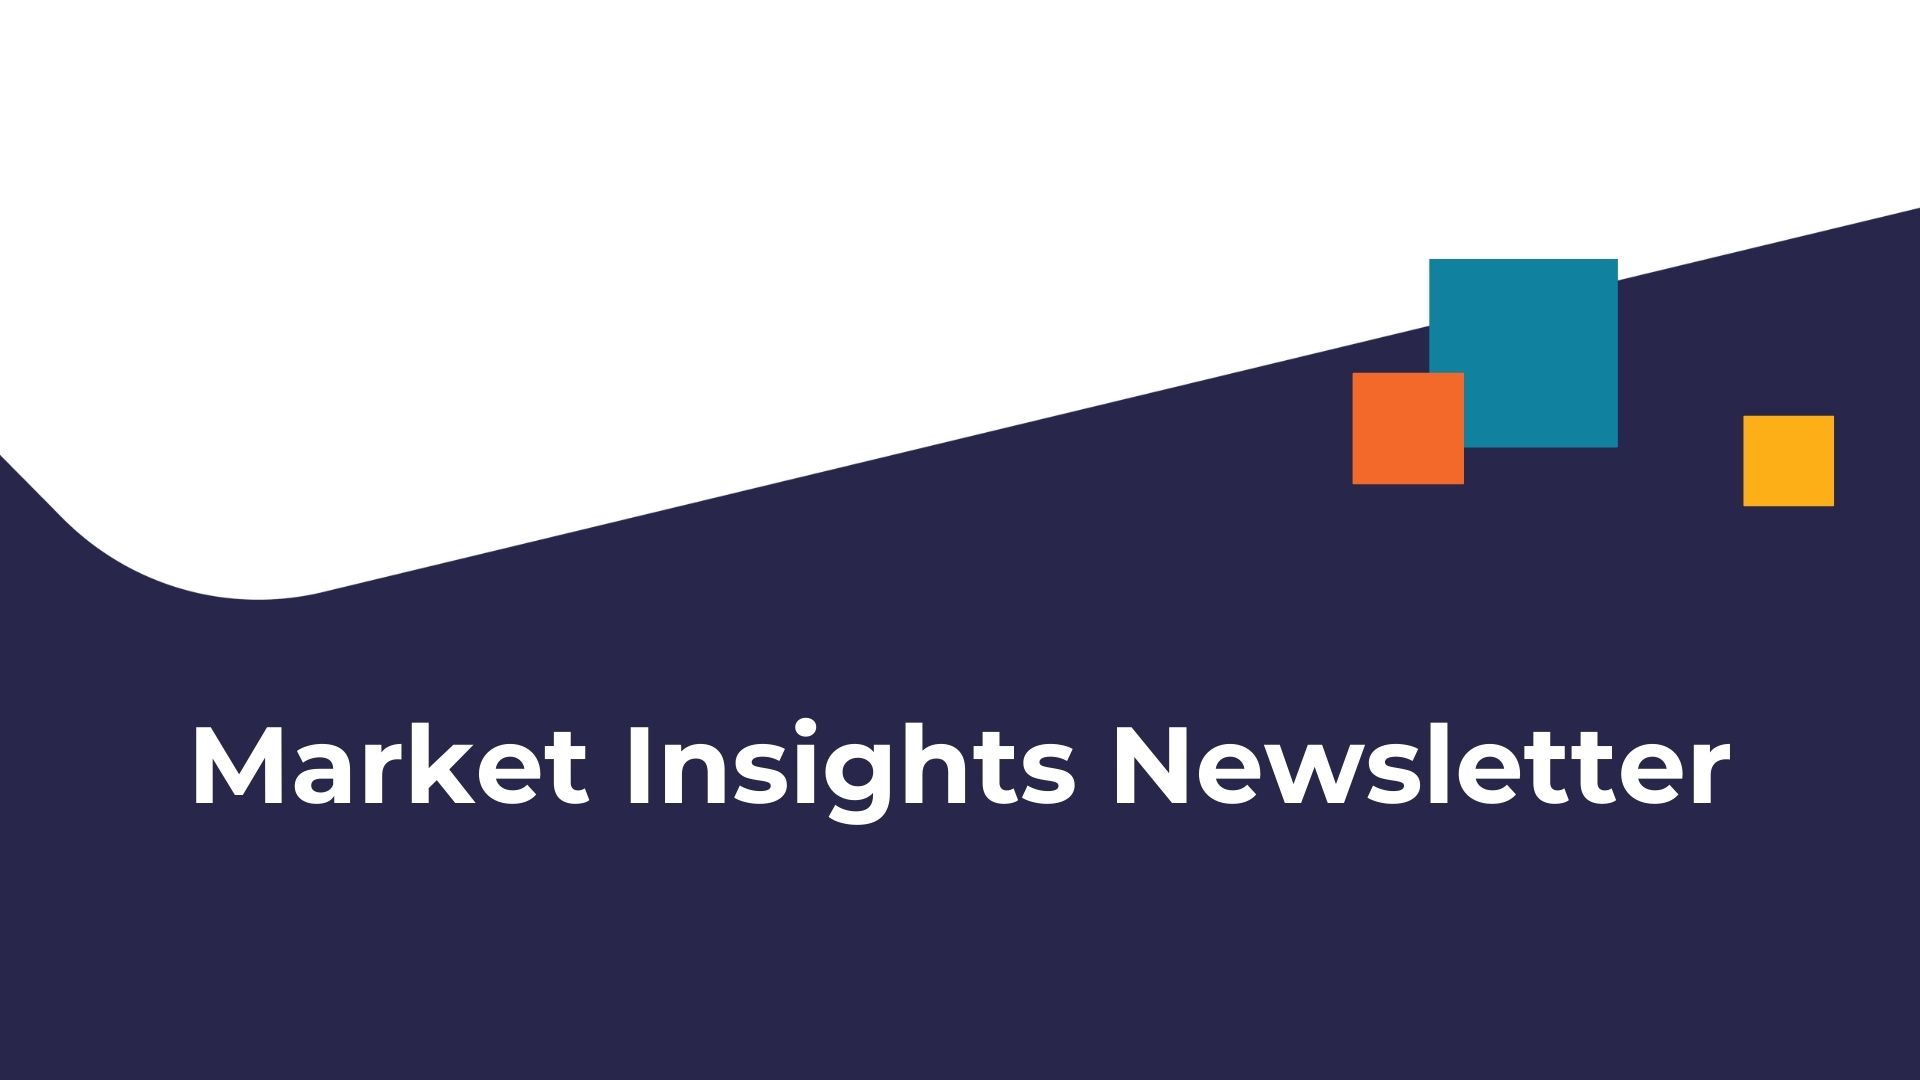 CEMD branded dark navy and white background with three graphic squares in teal, orange, and yellow of varying sizes with text, "Market Insights Newsletter."